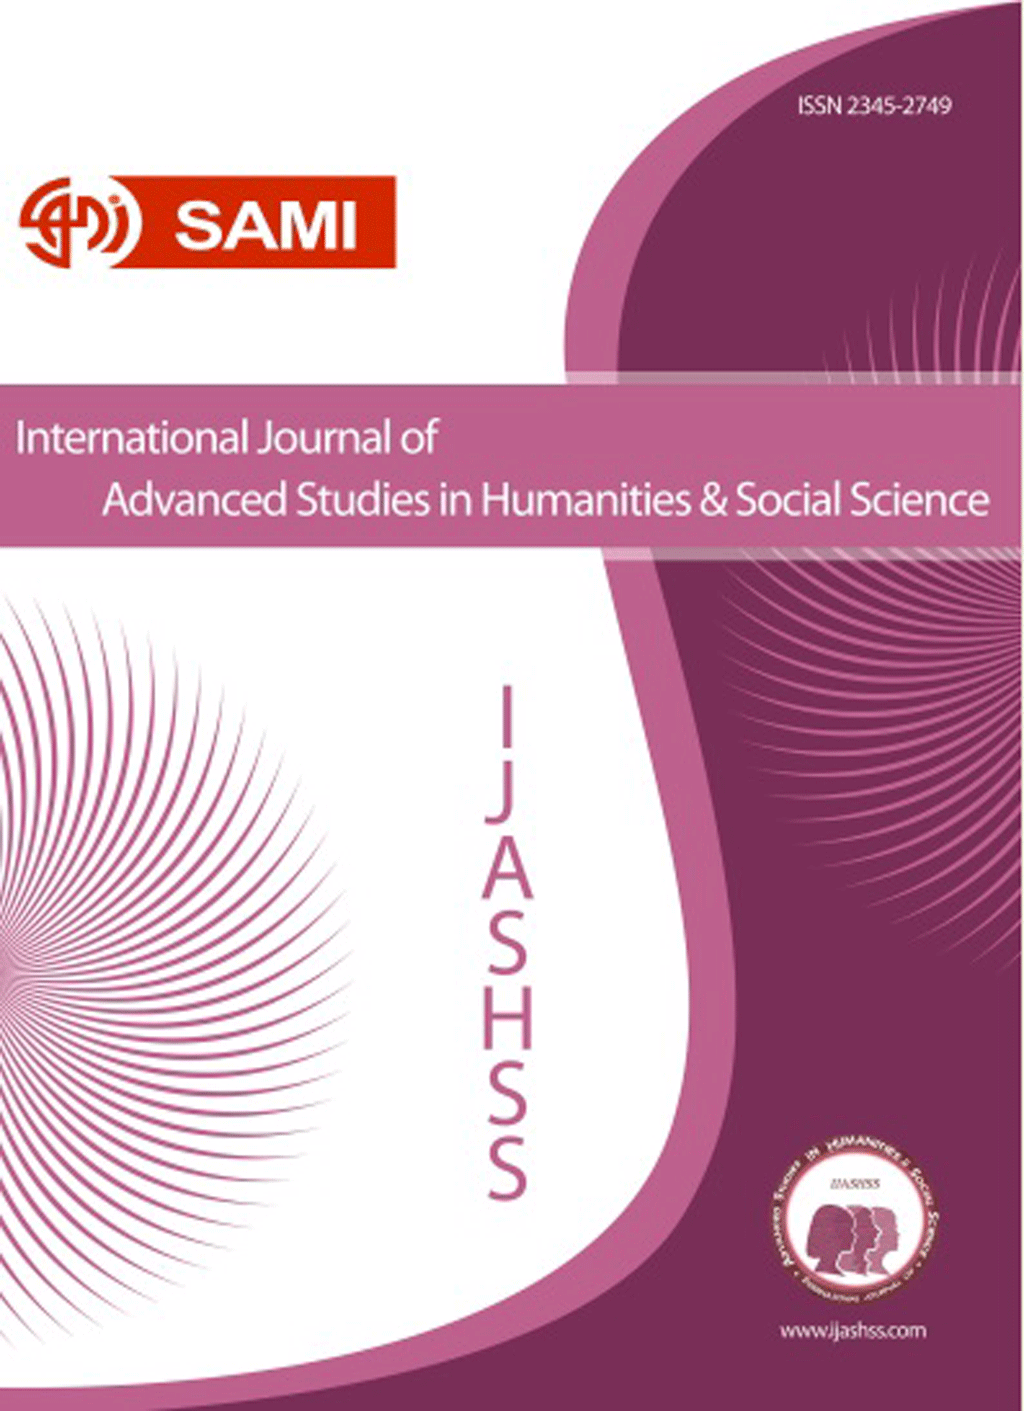 International Journal of Advanced Studies in Humanities and Social Science - October 2019, Volume 8 -  Issue 4